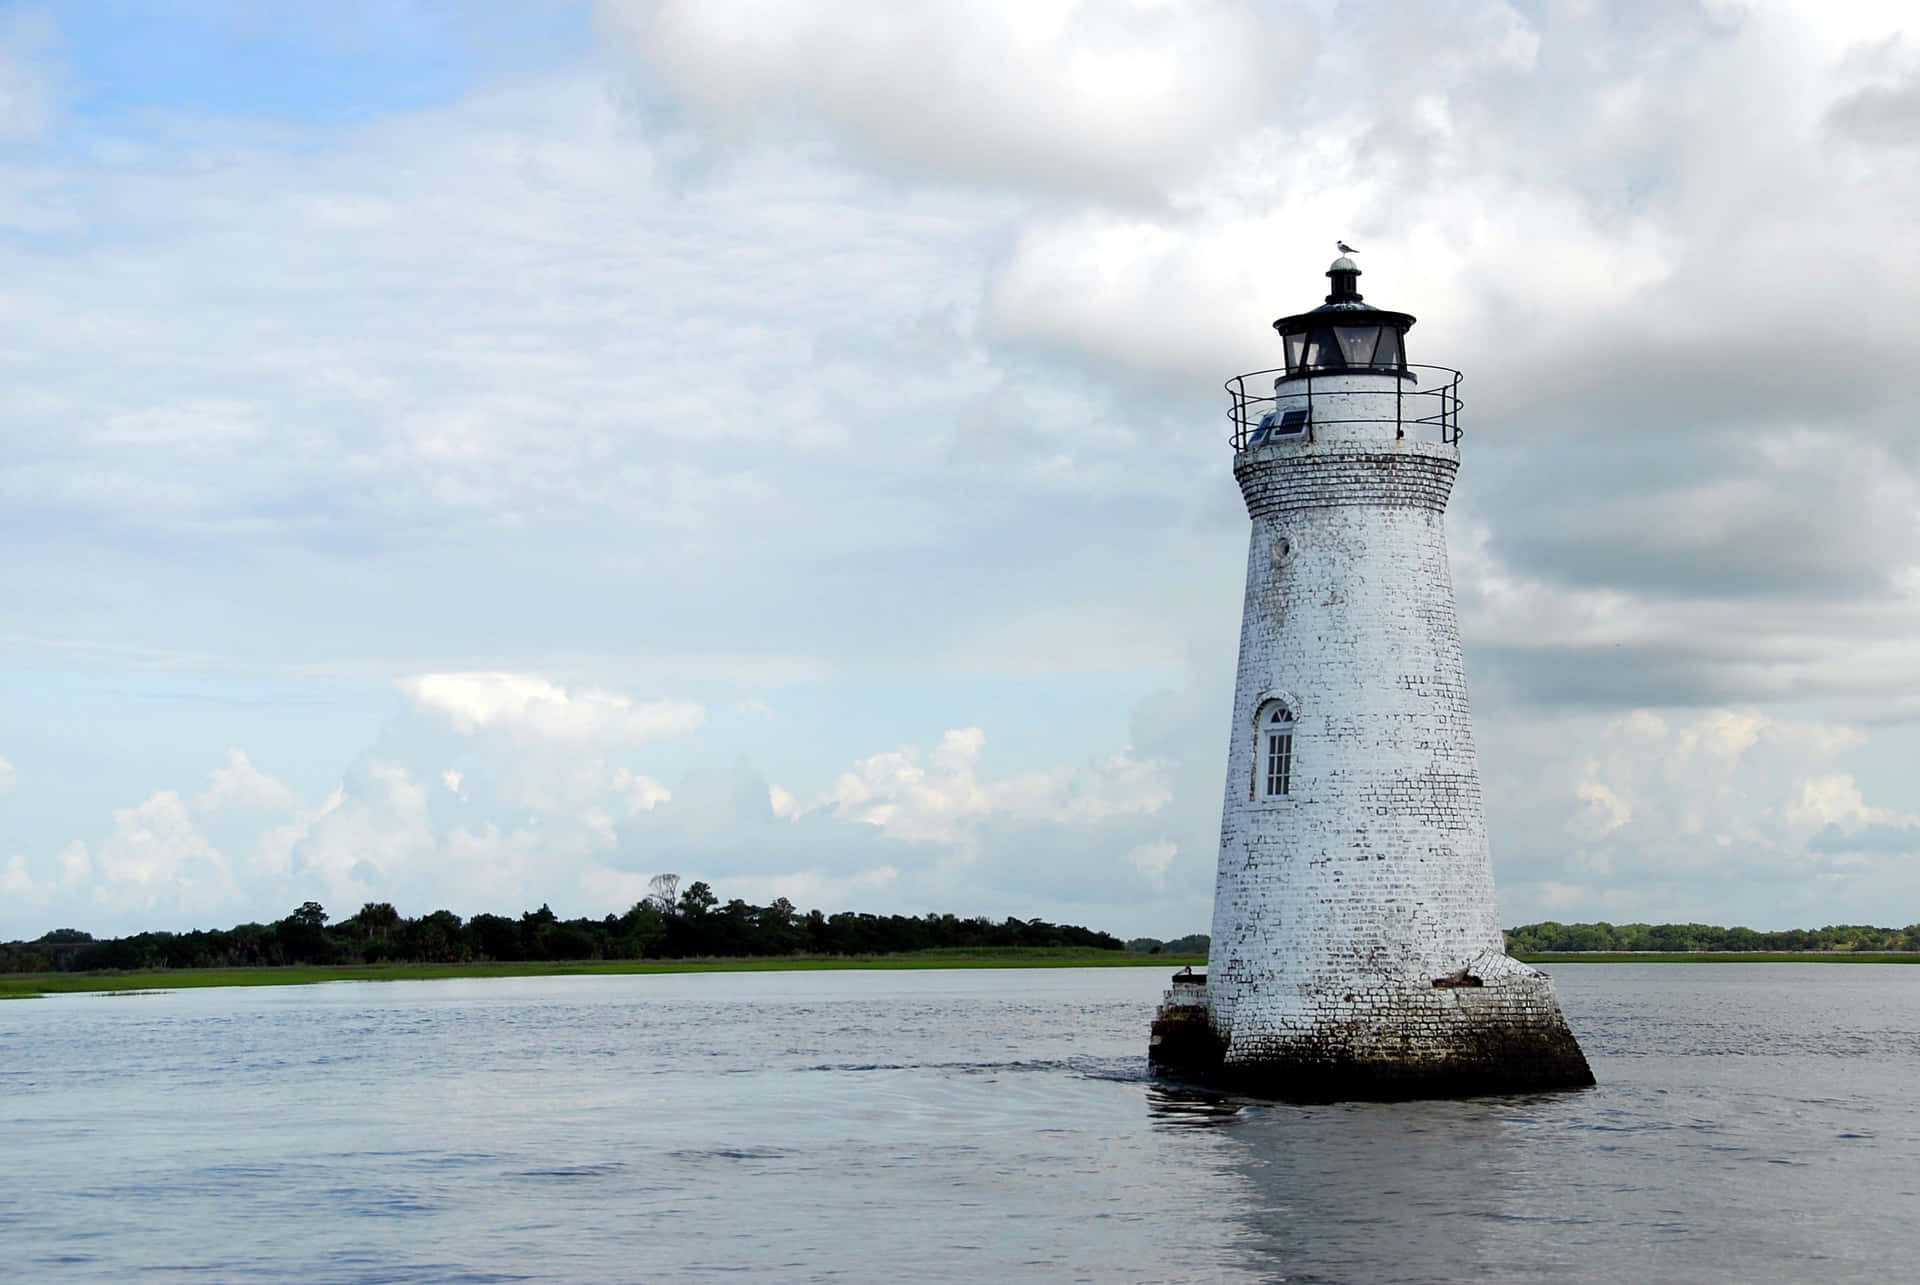 A Historic Lighthouse Amidst the Clouds